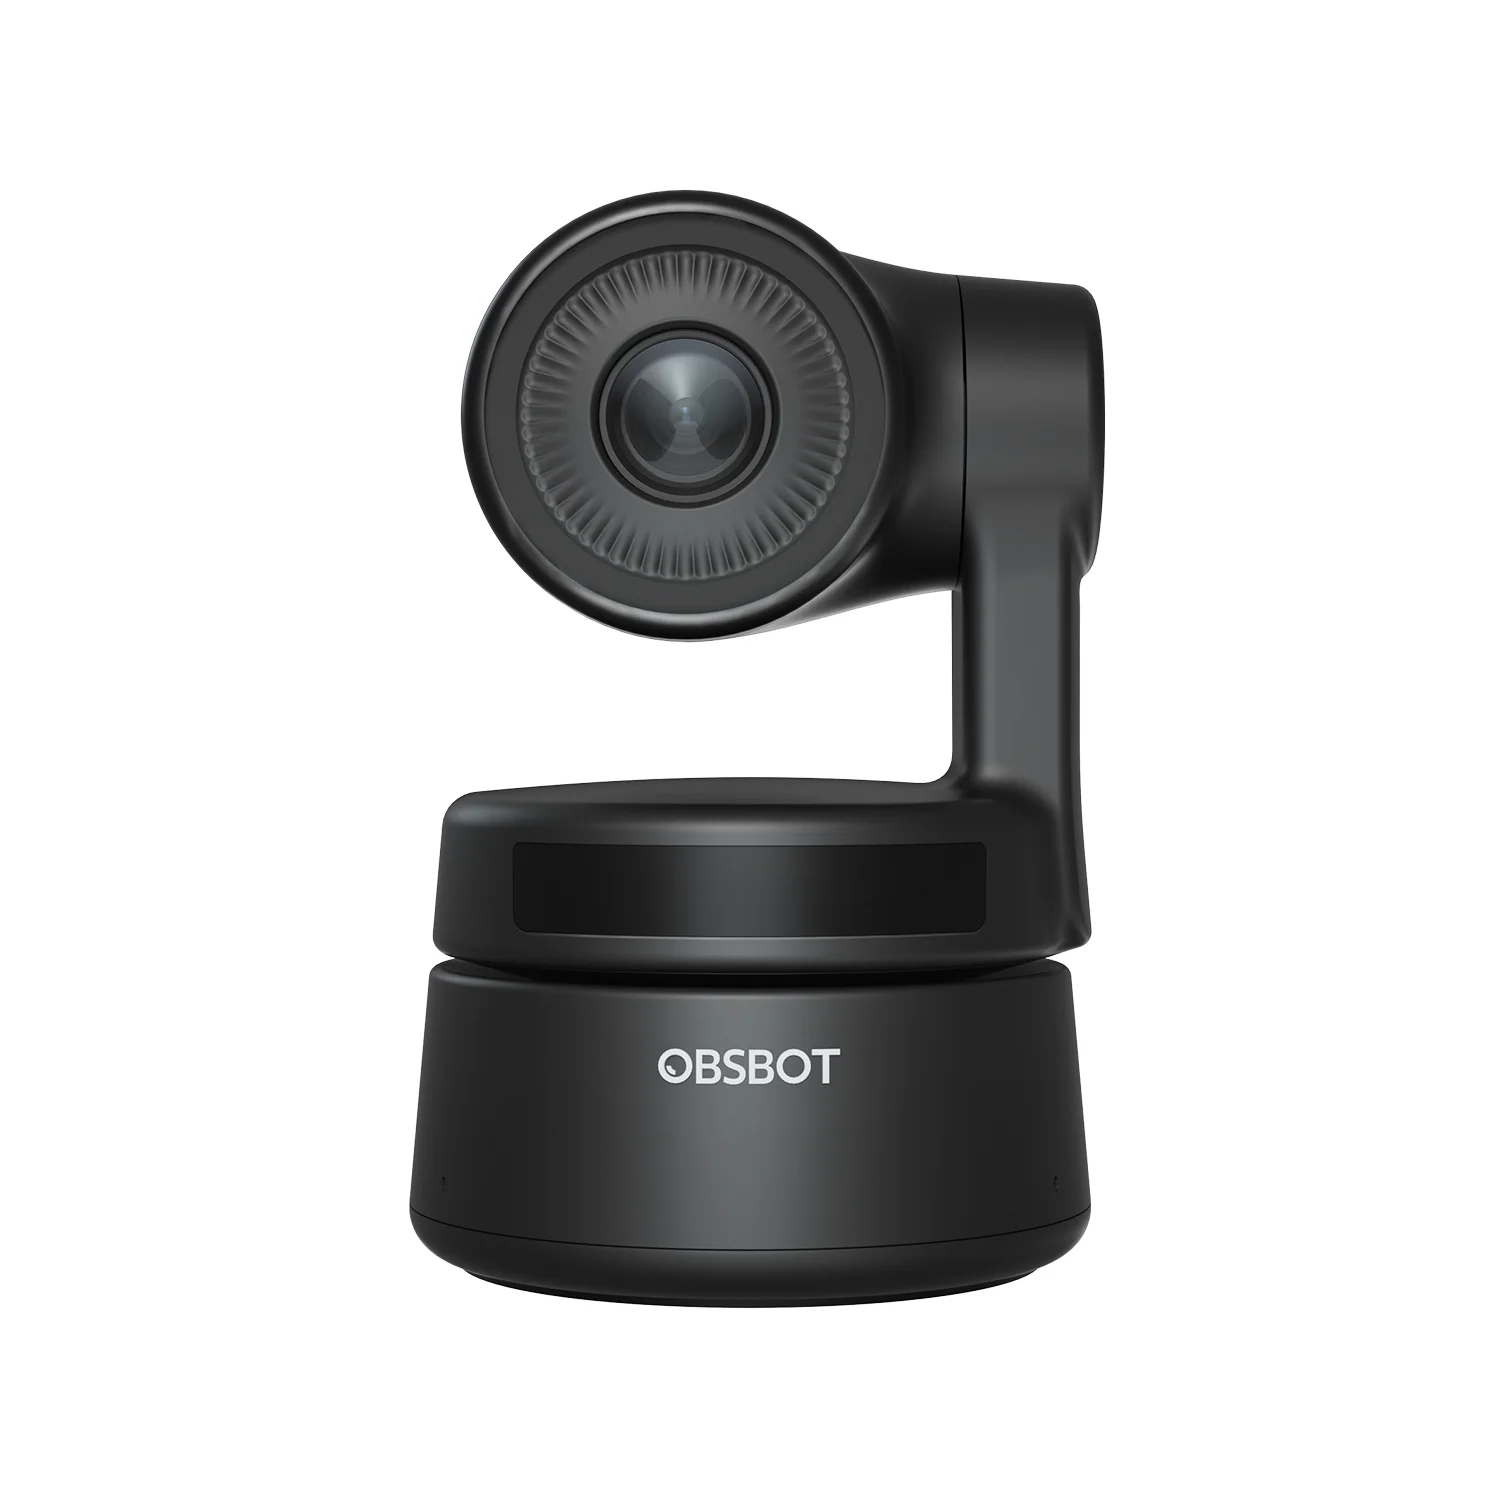 

OBSBOT Tiny AI-Powered PTZ Webcam camera 1080P Full HD 1080p Video Conferencing Recording Streaming - Black Live broadcast